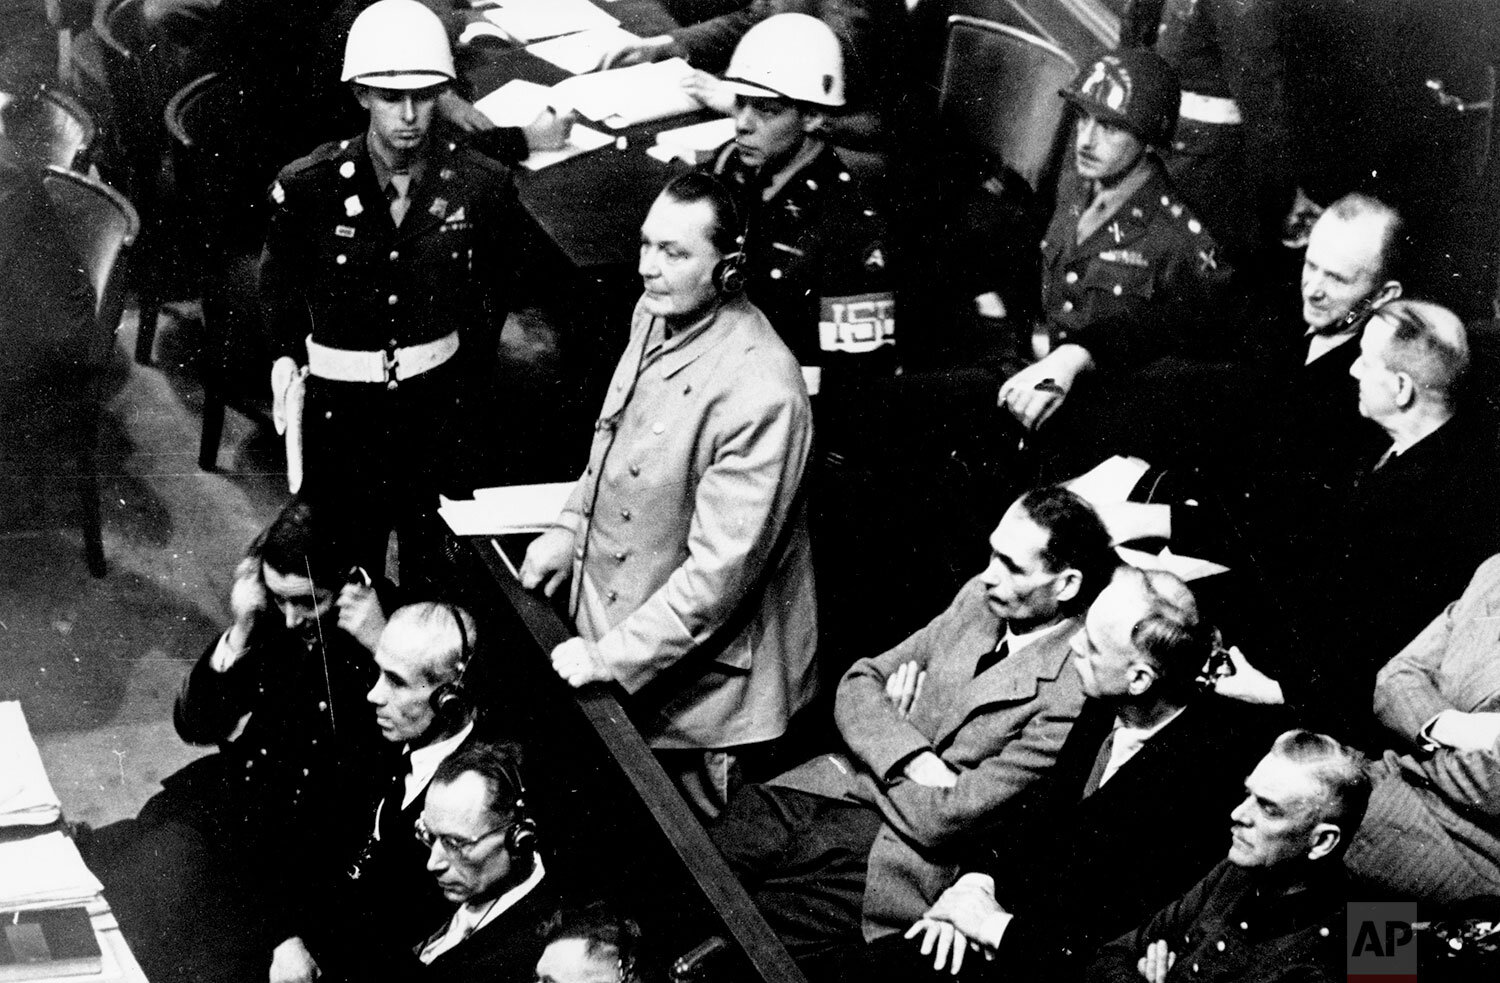  Reichsmarshal Hermann Goering stands in the prisoner's dock at the Nuremberg War Crimes Trial in Germany on Nov. 21, 1945.  He is entering a plea of not guilty to the International Military Tribunal Indictment. Goering is wearing headphones of the c